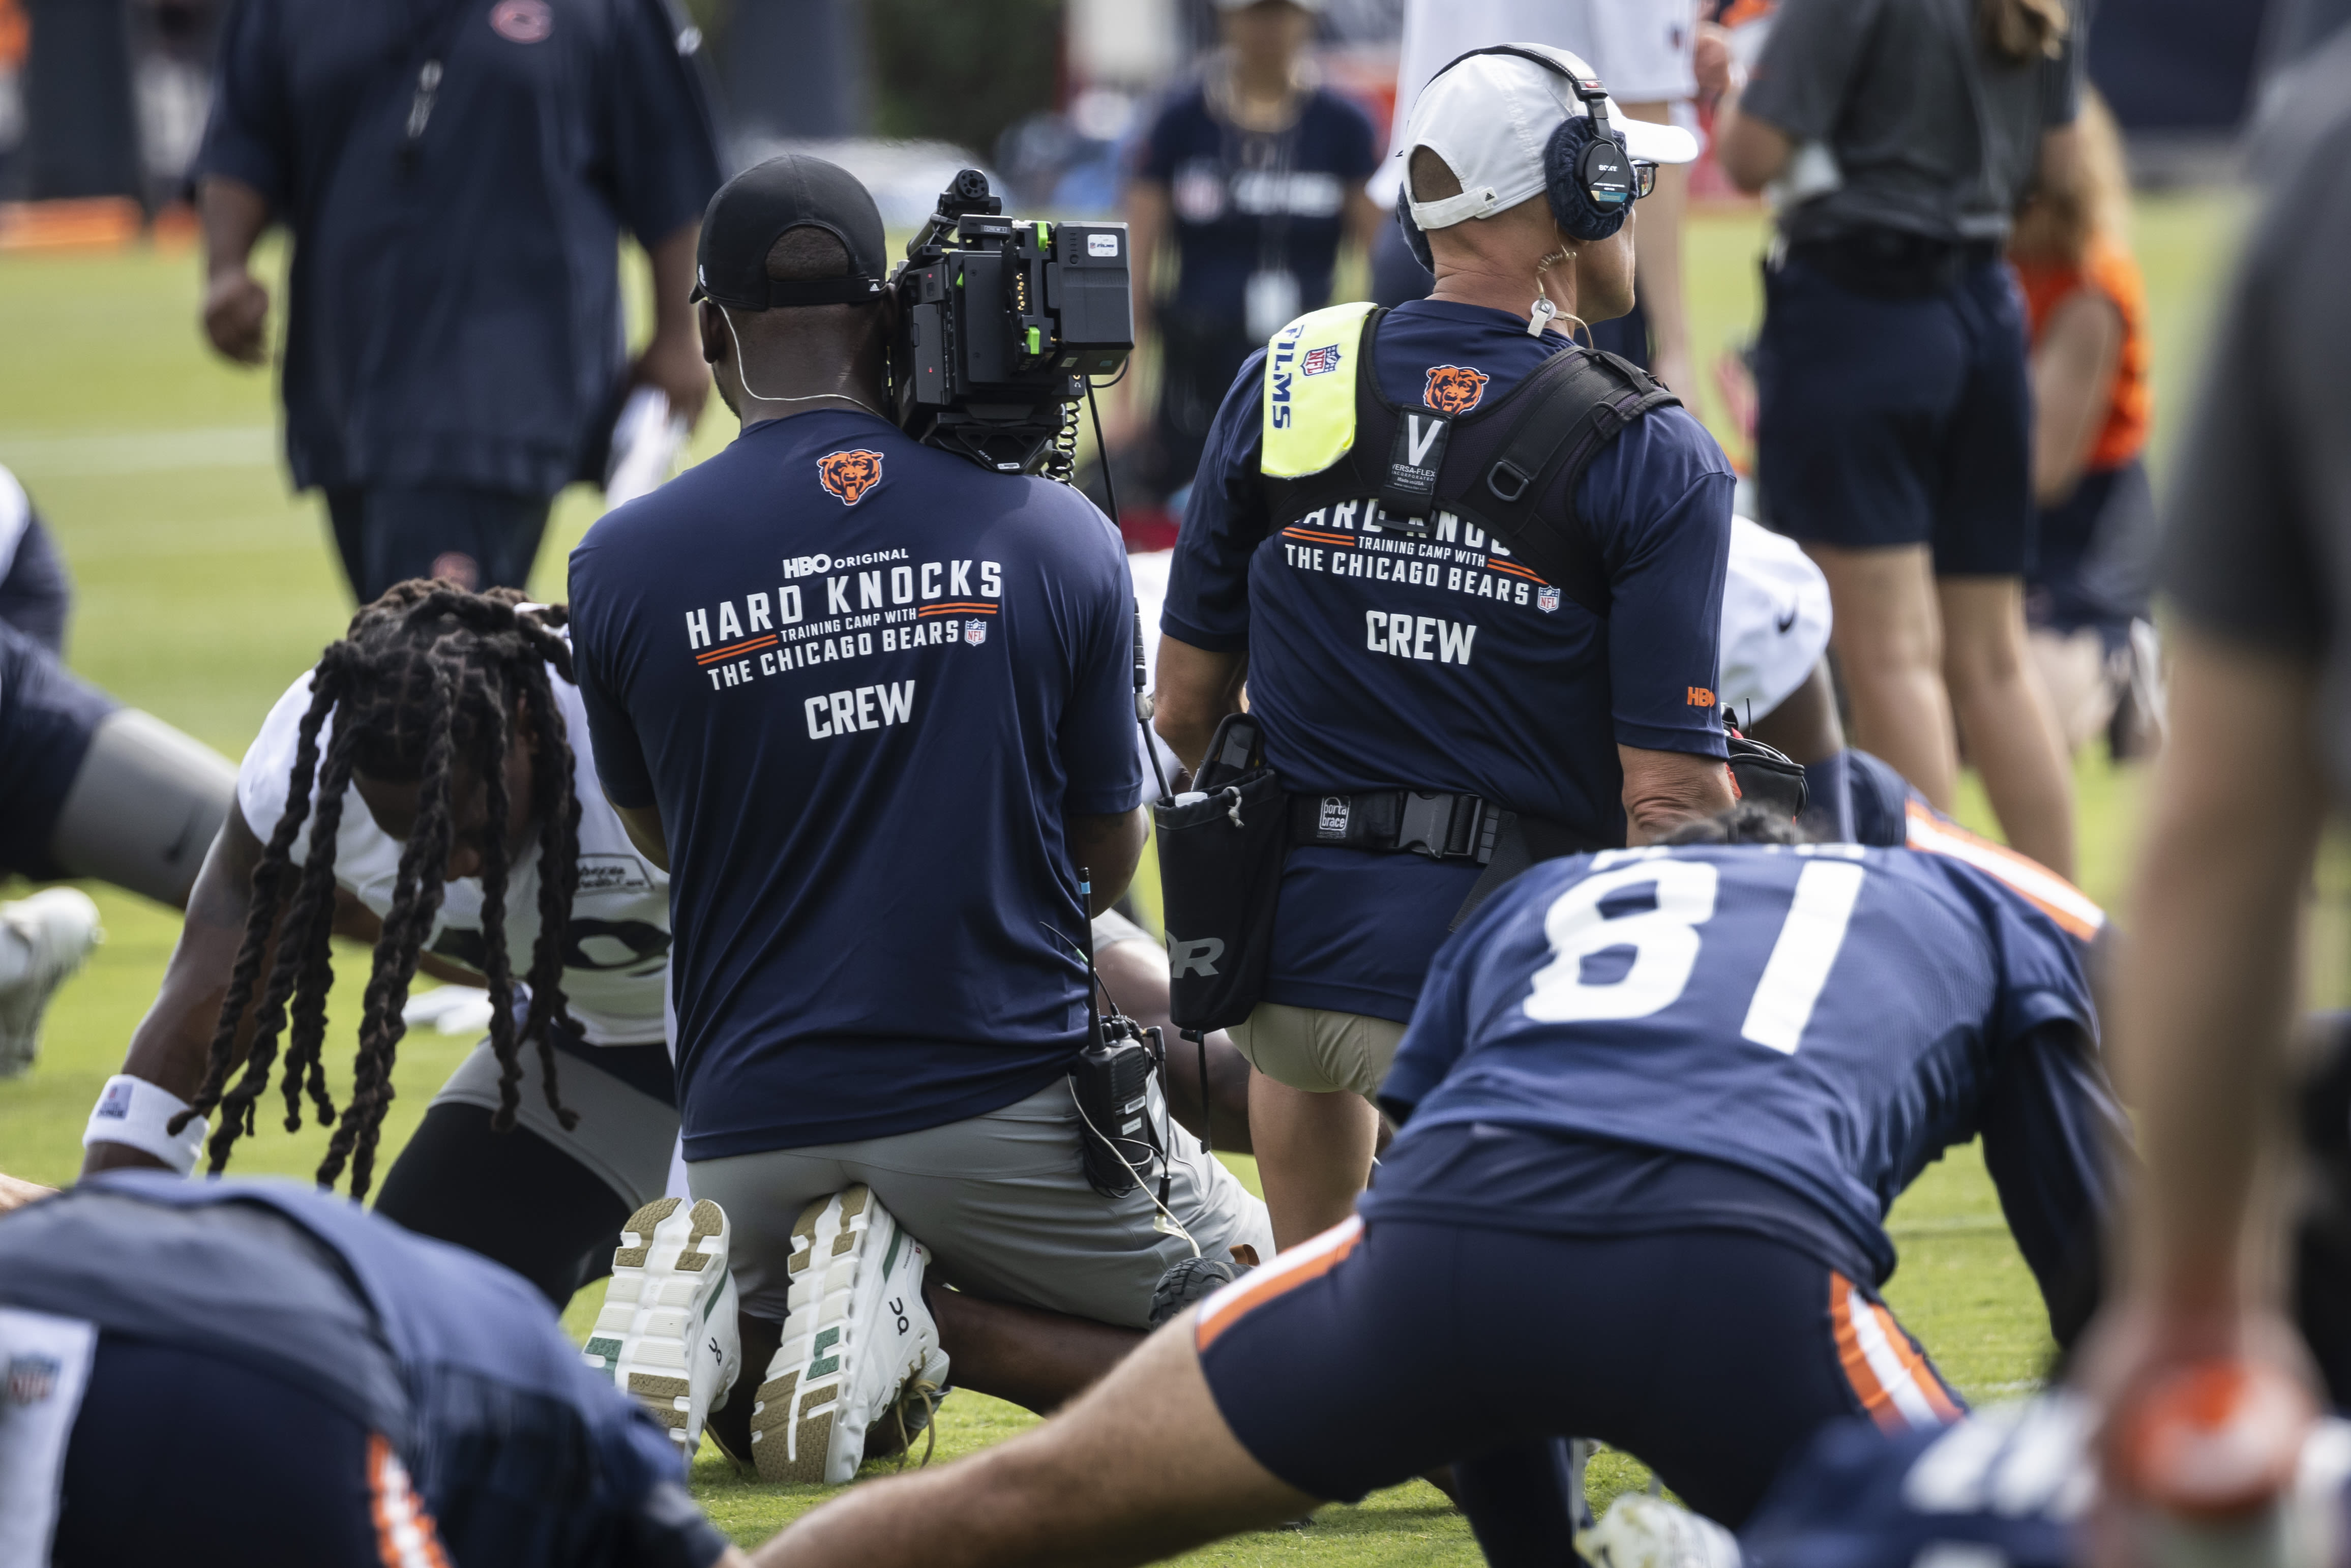 Bears say having 'Hard Knocks' crew at Halas Hall not nearly as challenging as they expected